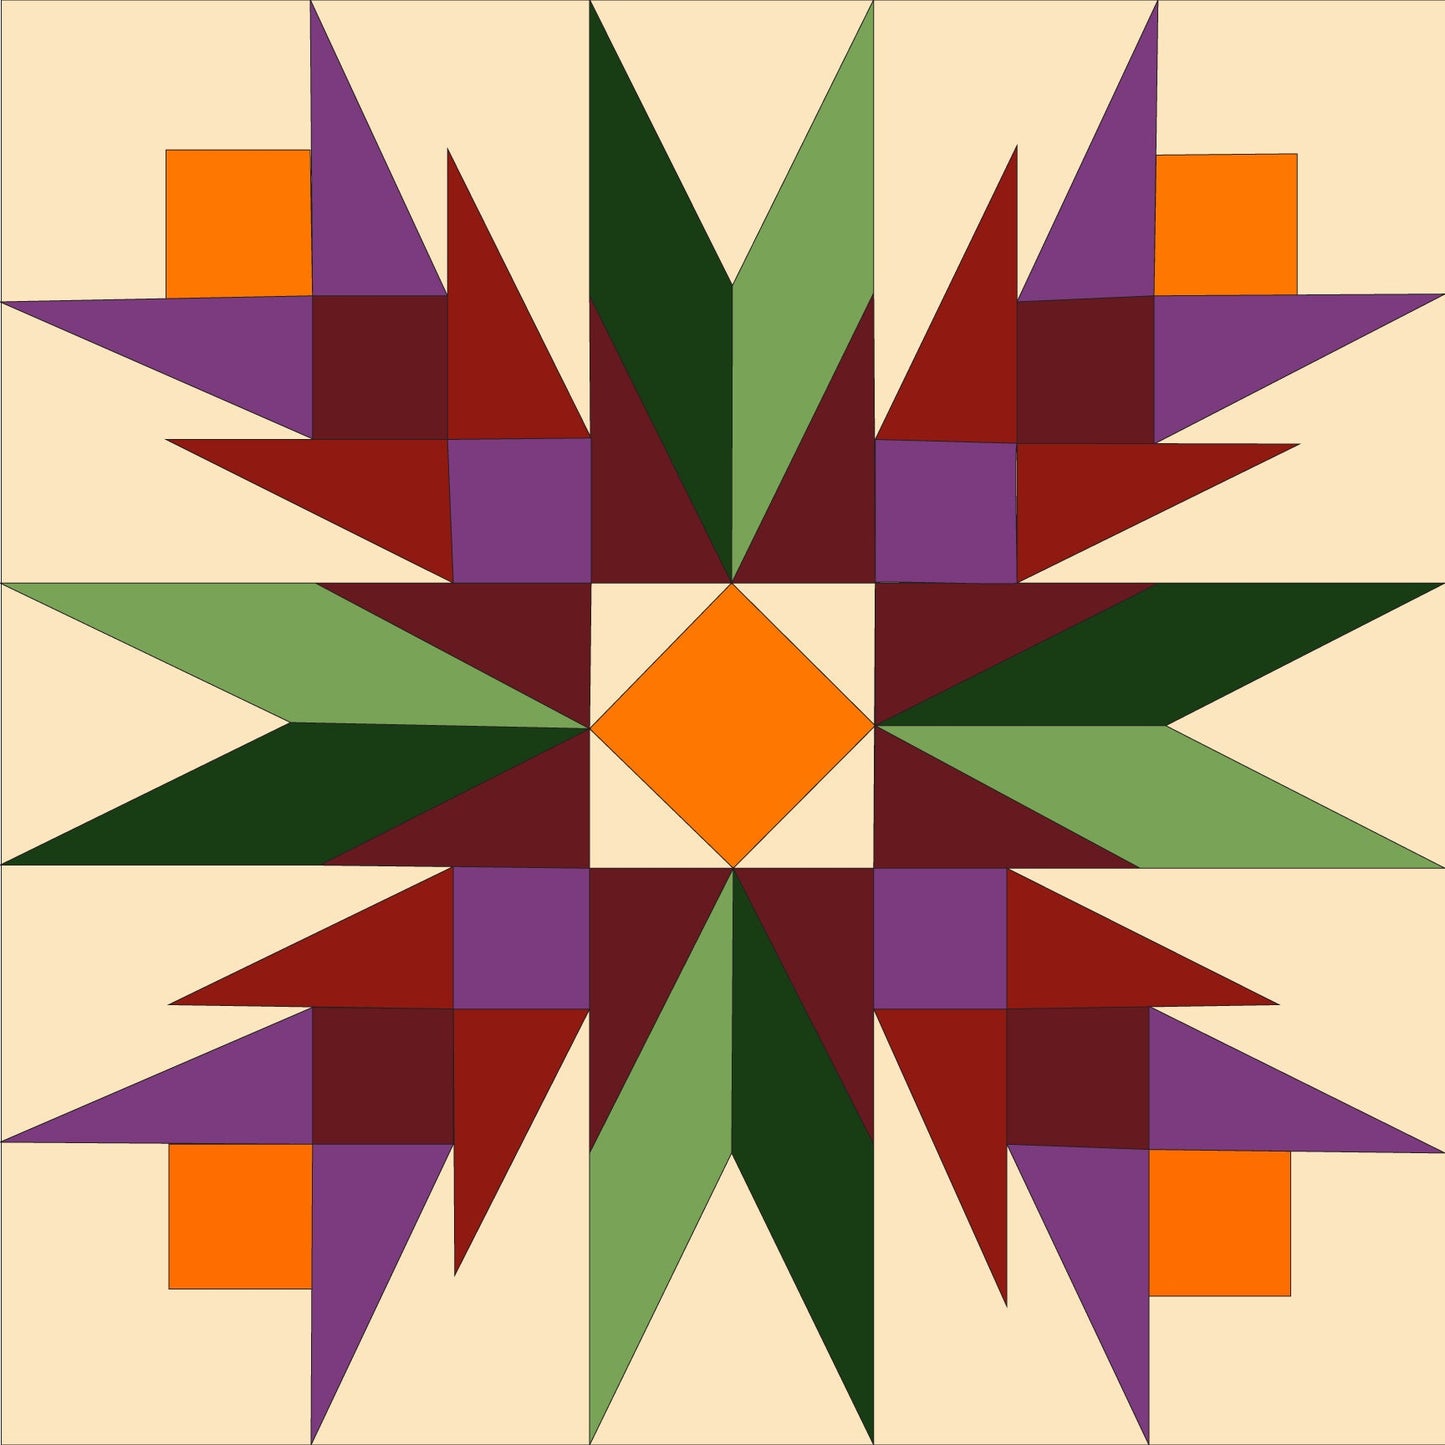 48x48" Double Crocus Barn Quilt PDF Pattern, SVG Pattern, Wood quilt to paint for outdoors